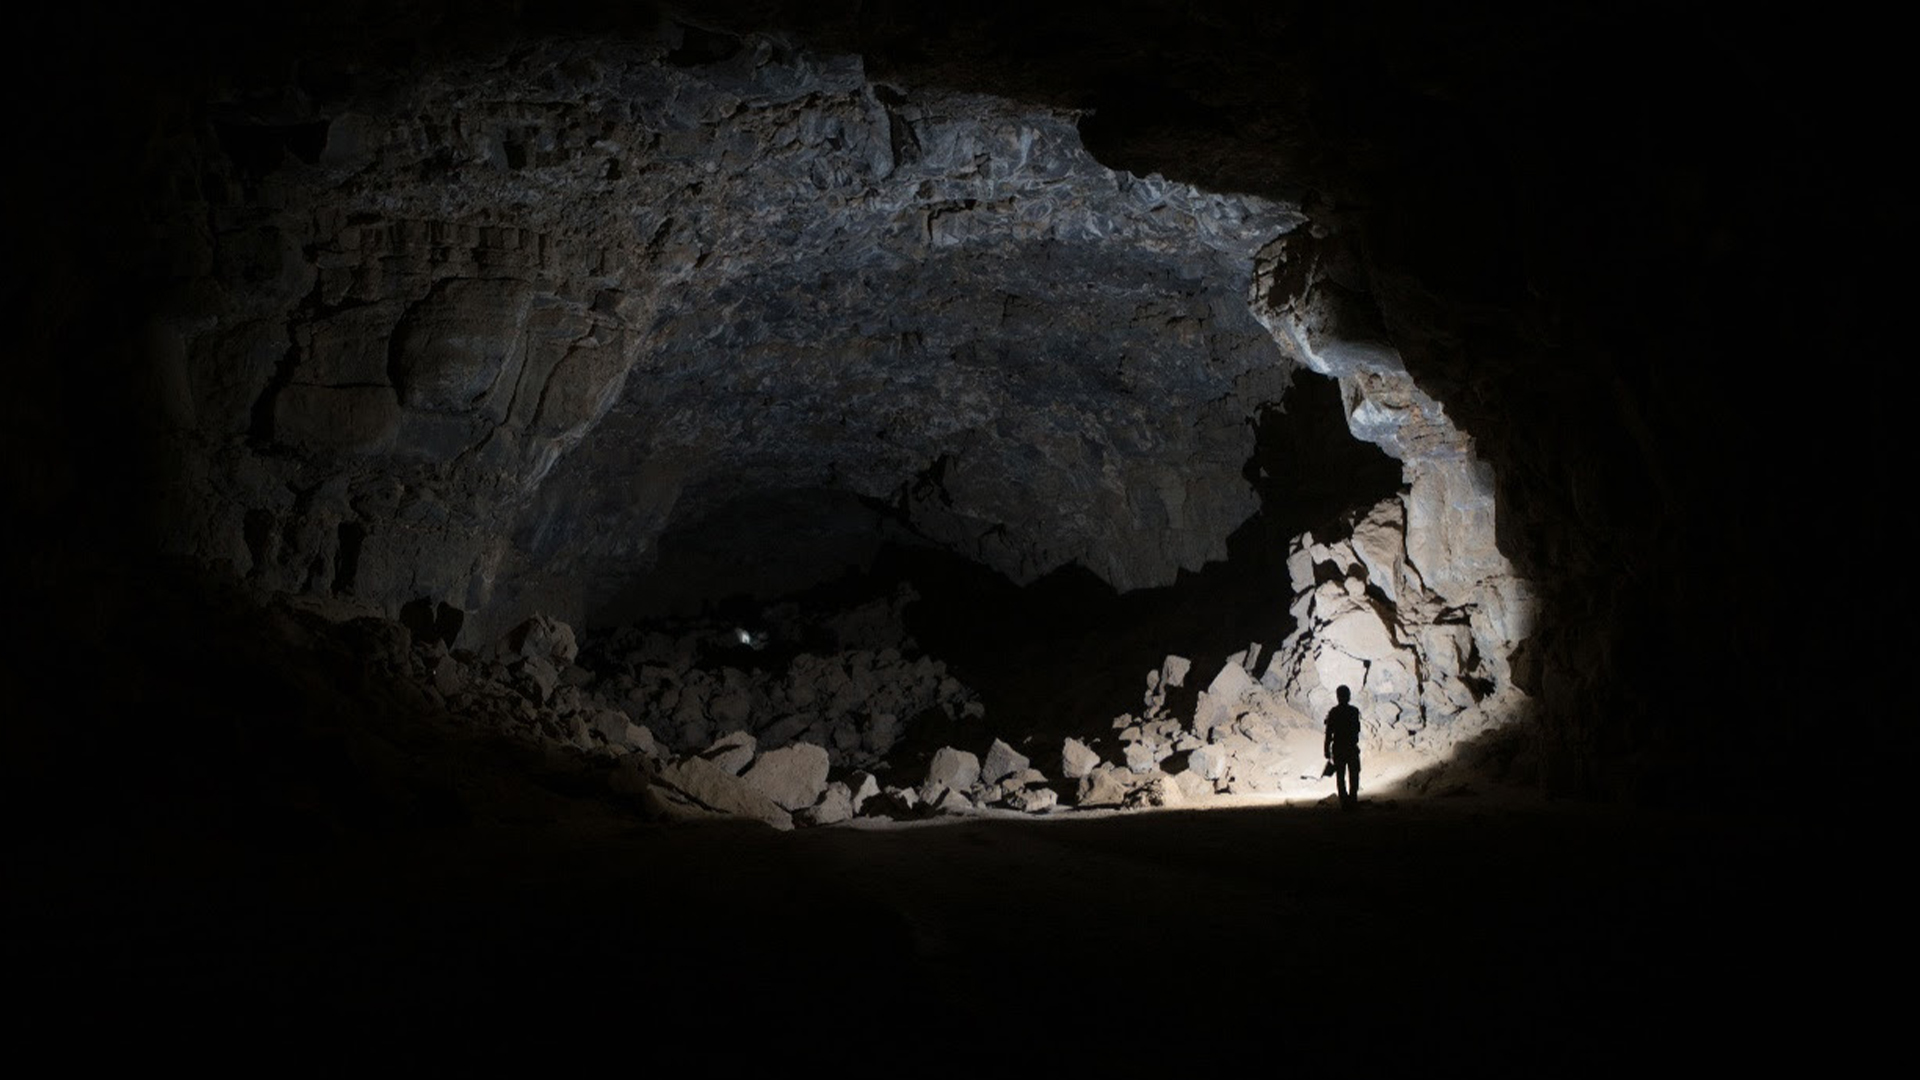 Humans were living in a lava tube 7,000 years ago on the Arabian Peninsula